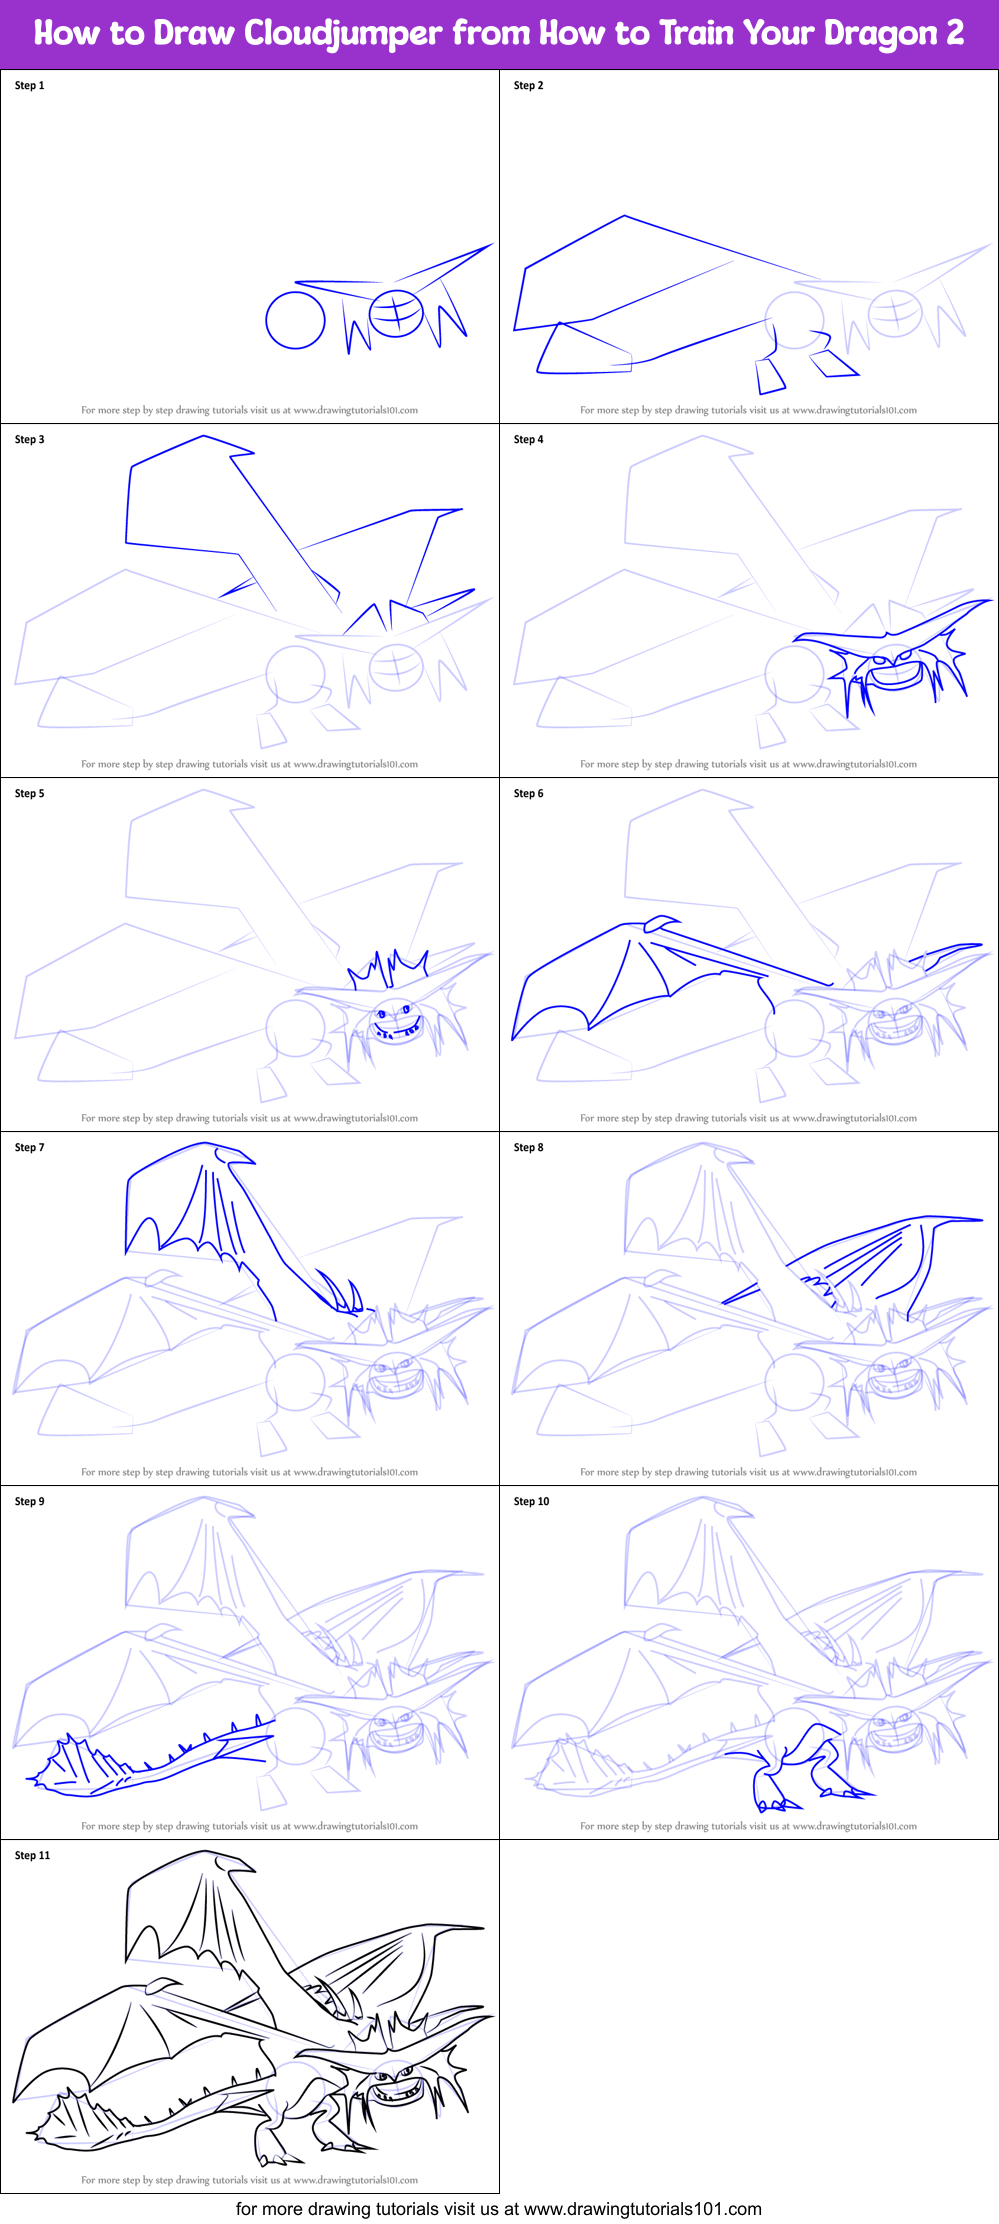 How To Draw Cloudjumper From How To Train Your Dragon 2 Printable Step By Step Drawing Sheet Drawingtutorials101 Com